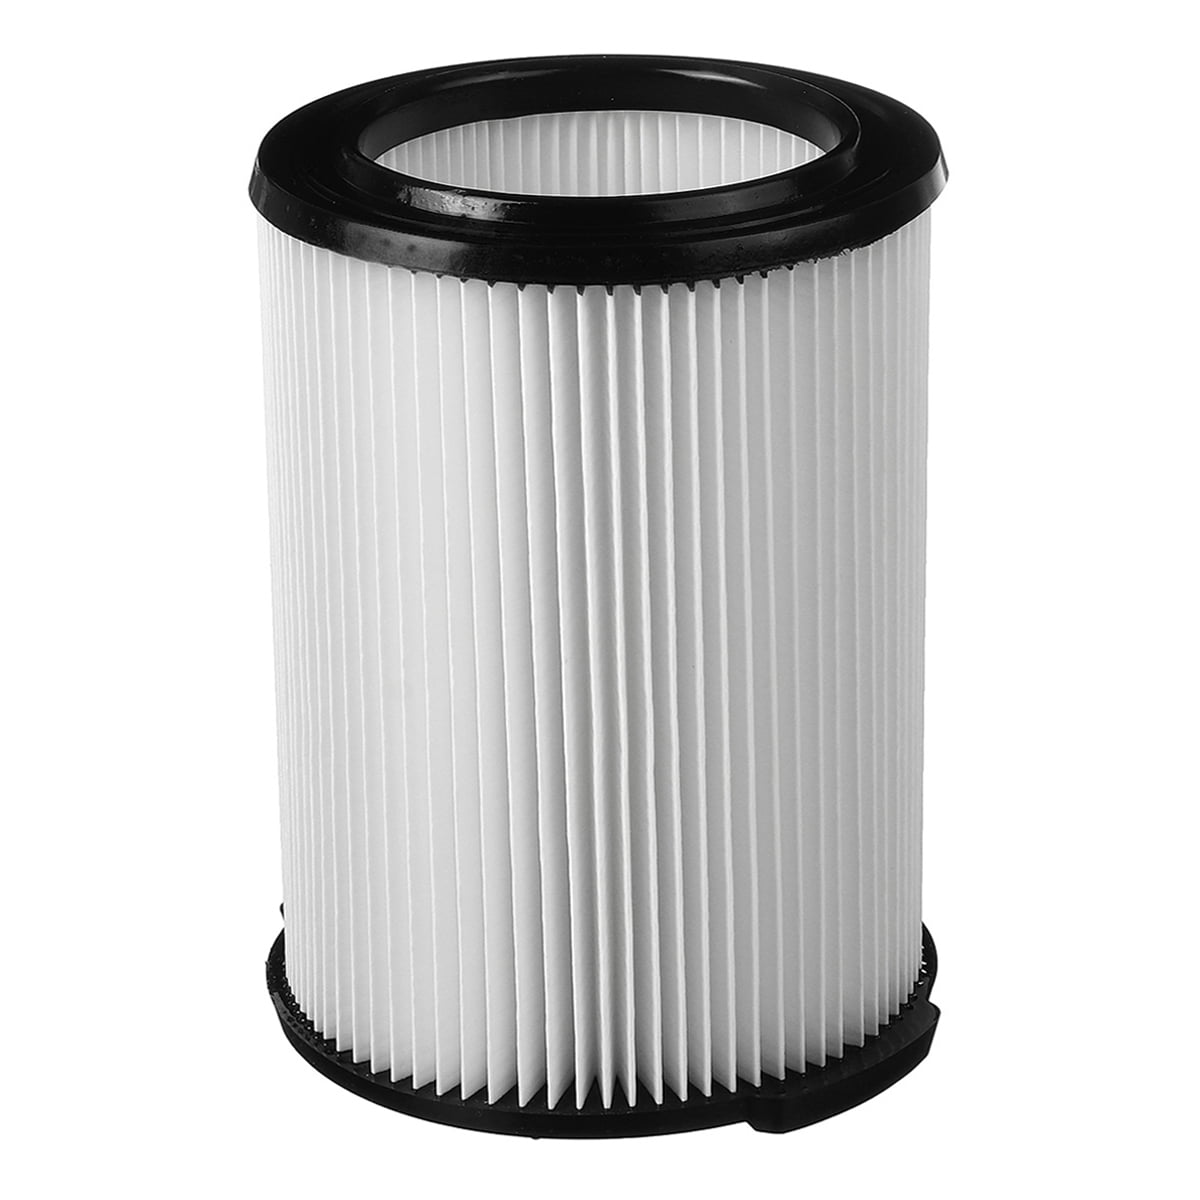 Wet/ Dry Vacuum Cleaner Filter Element Replacement For Ridgid VF5000 6-20 Gallon 